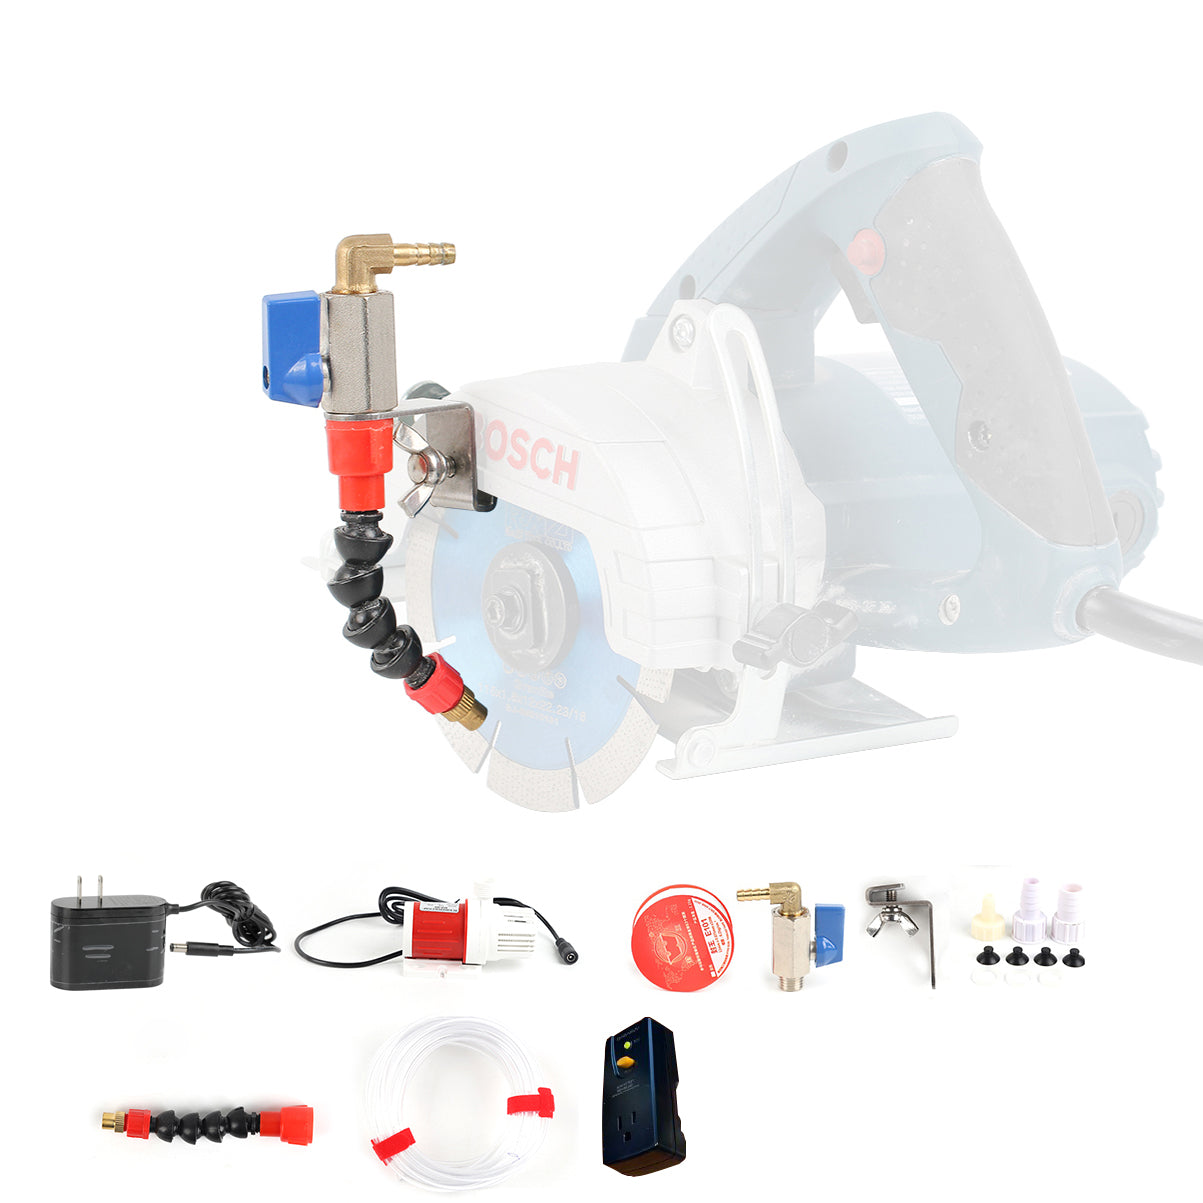 Raizi Universal Angle Grinder Water Attachment with Water Pump and Leakage Protector